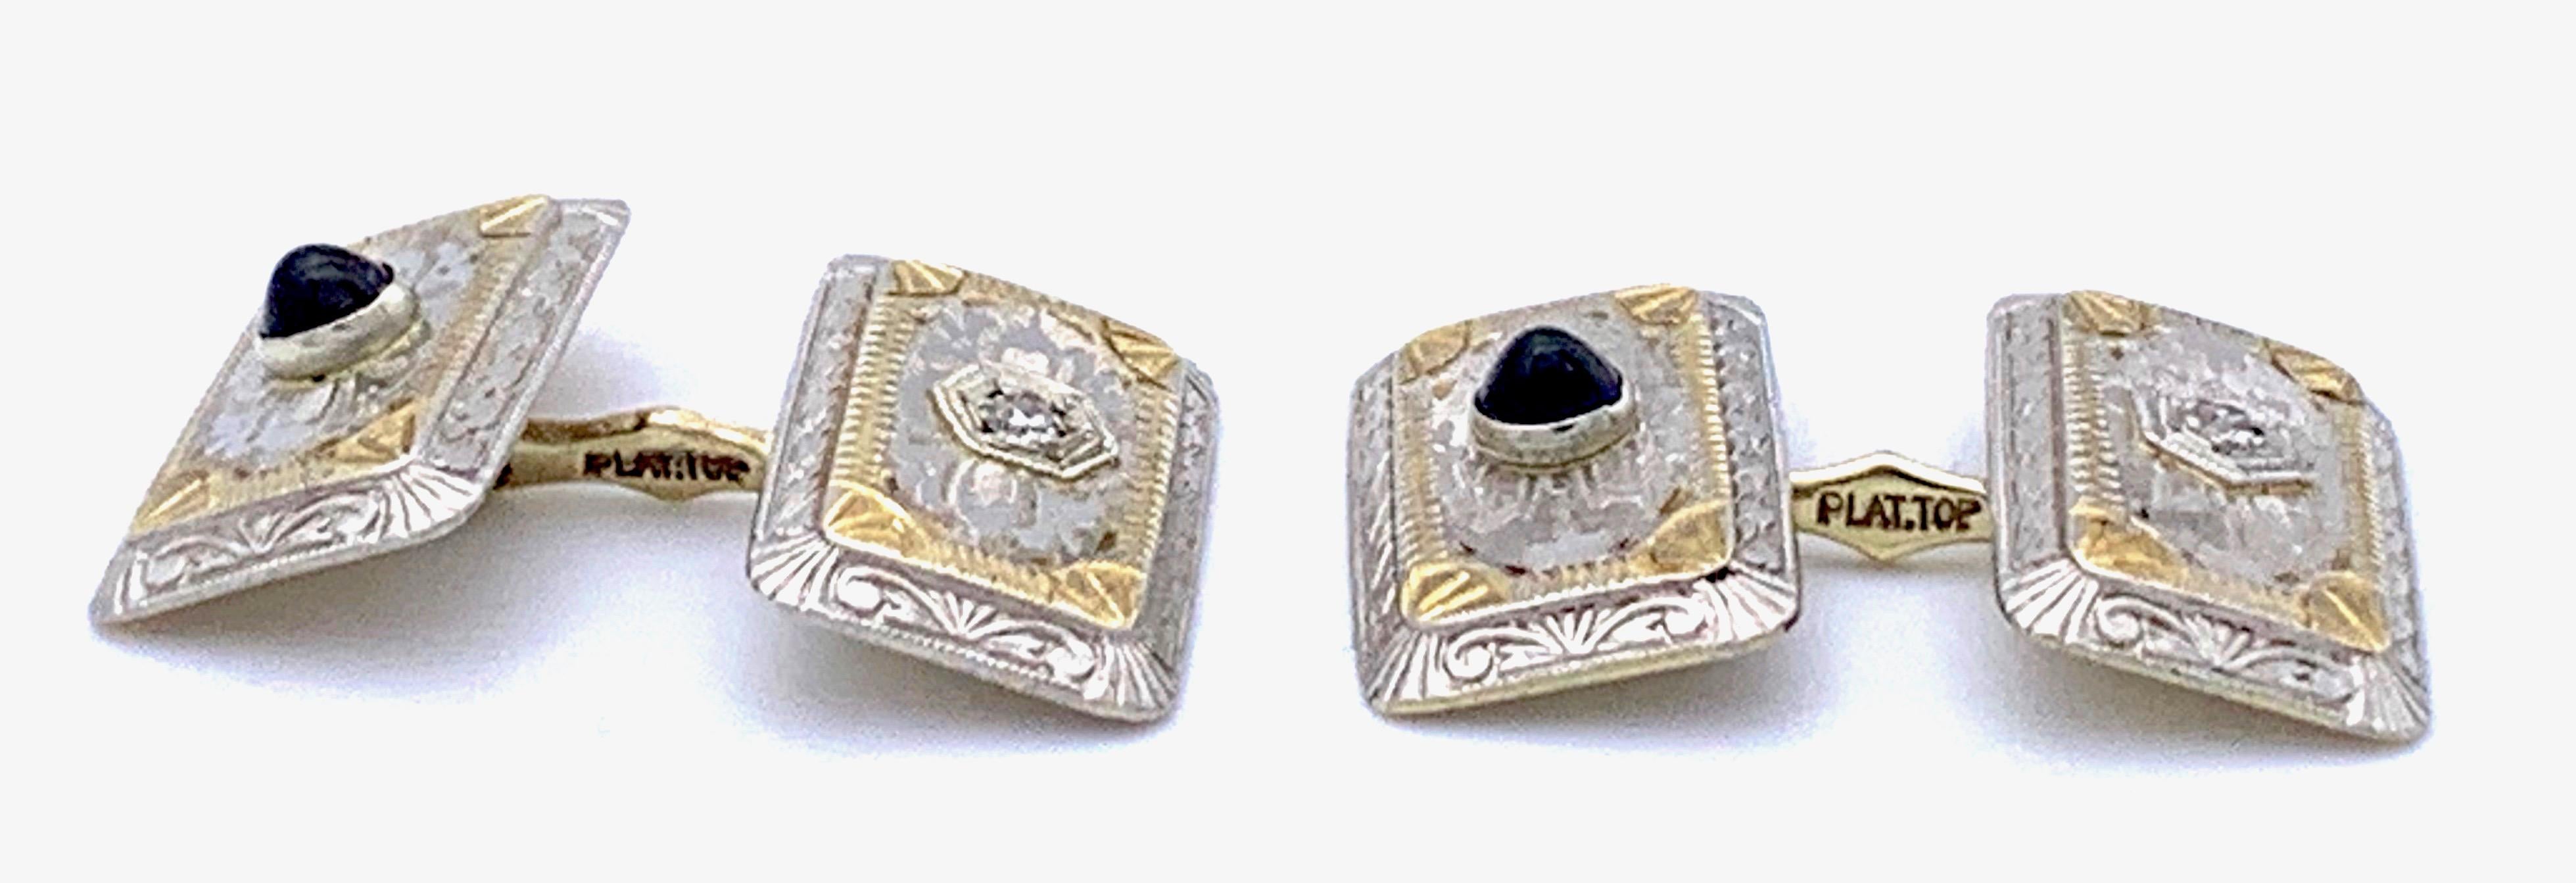 These elegant cufflinks are particularly attractive because of their two tone look. Finely engraved on both sides, this unusual pair features a cabochon cut sapphire on one cufflink and a round cut diamond on the other. 